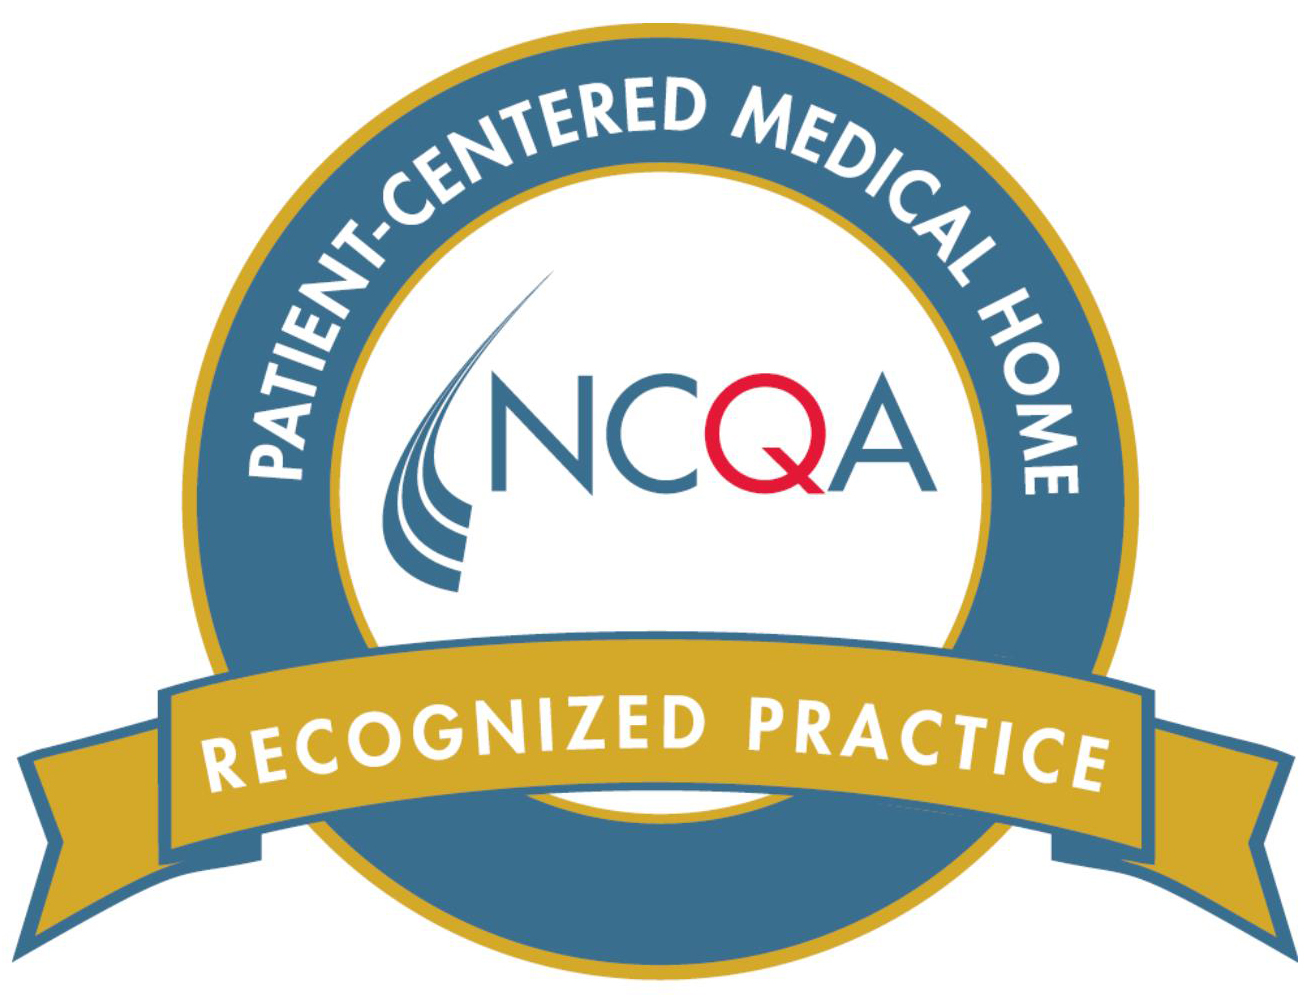 We are a NCQA-certified Patient-Centered Medical Home.